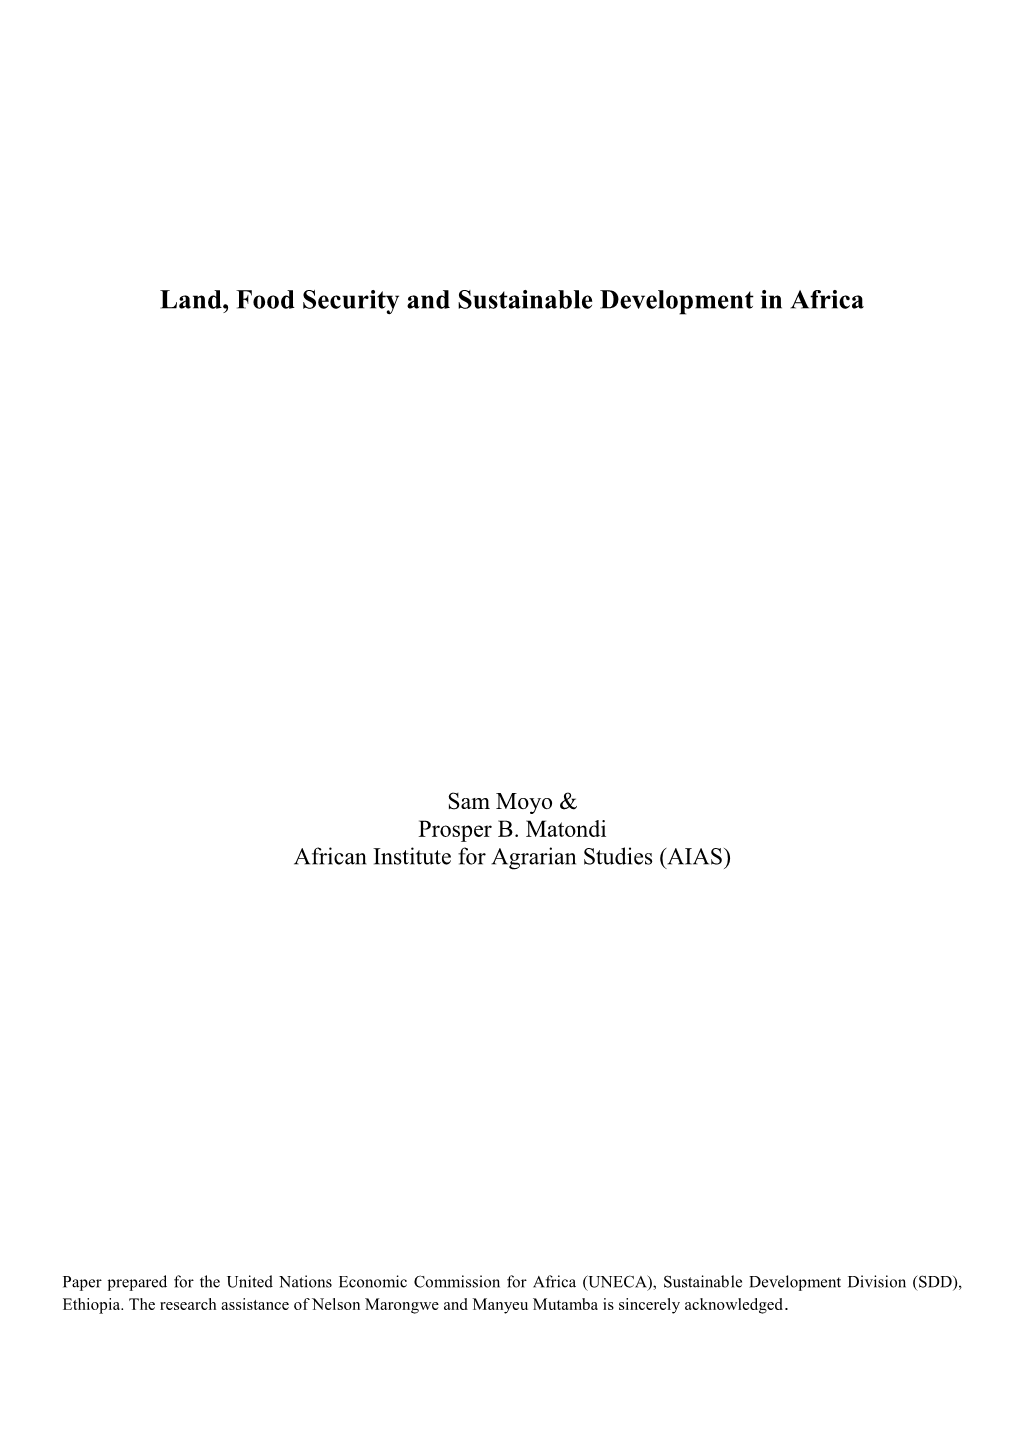 Land, Food Security and Sustainable Development in Africa